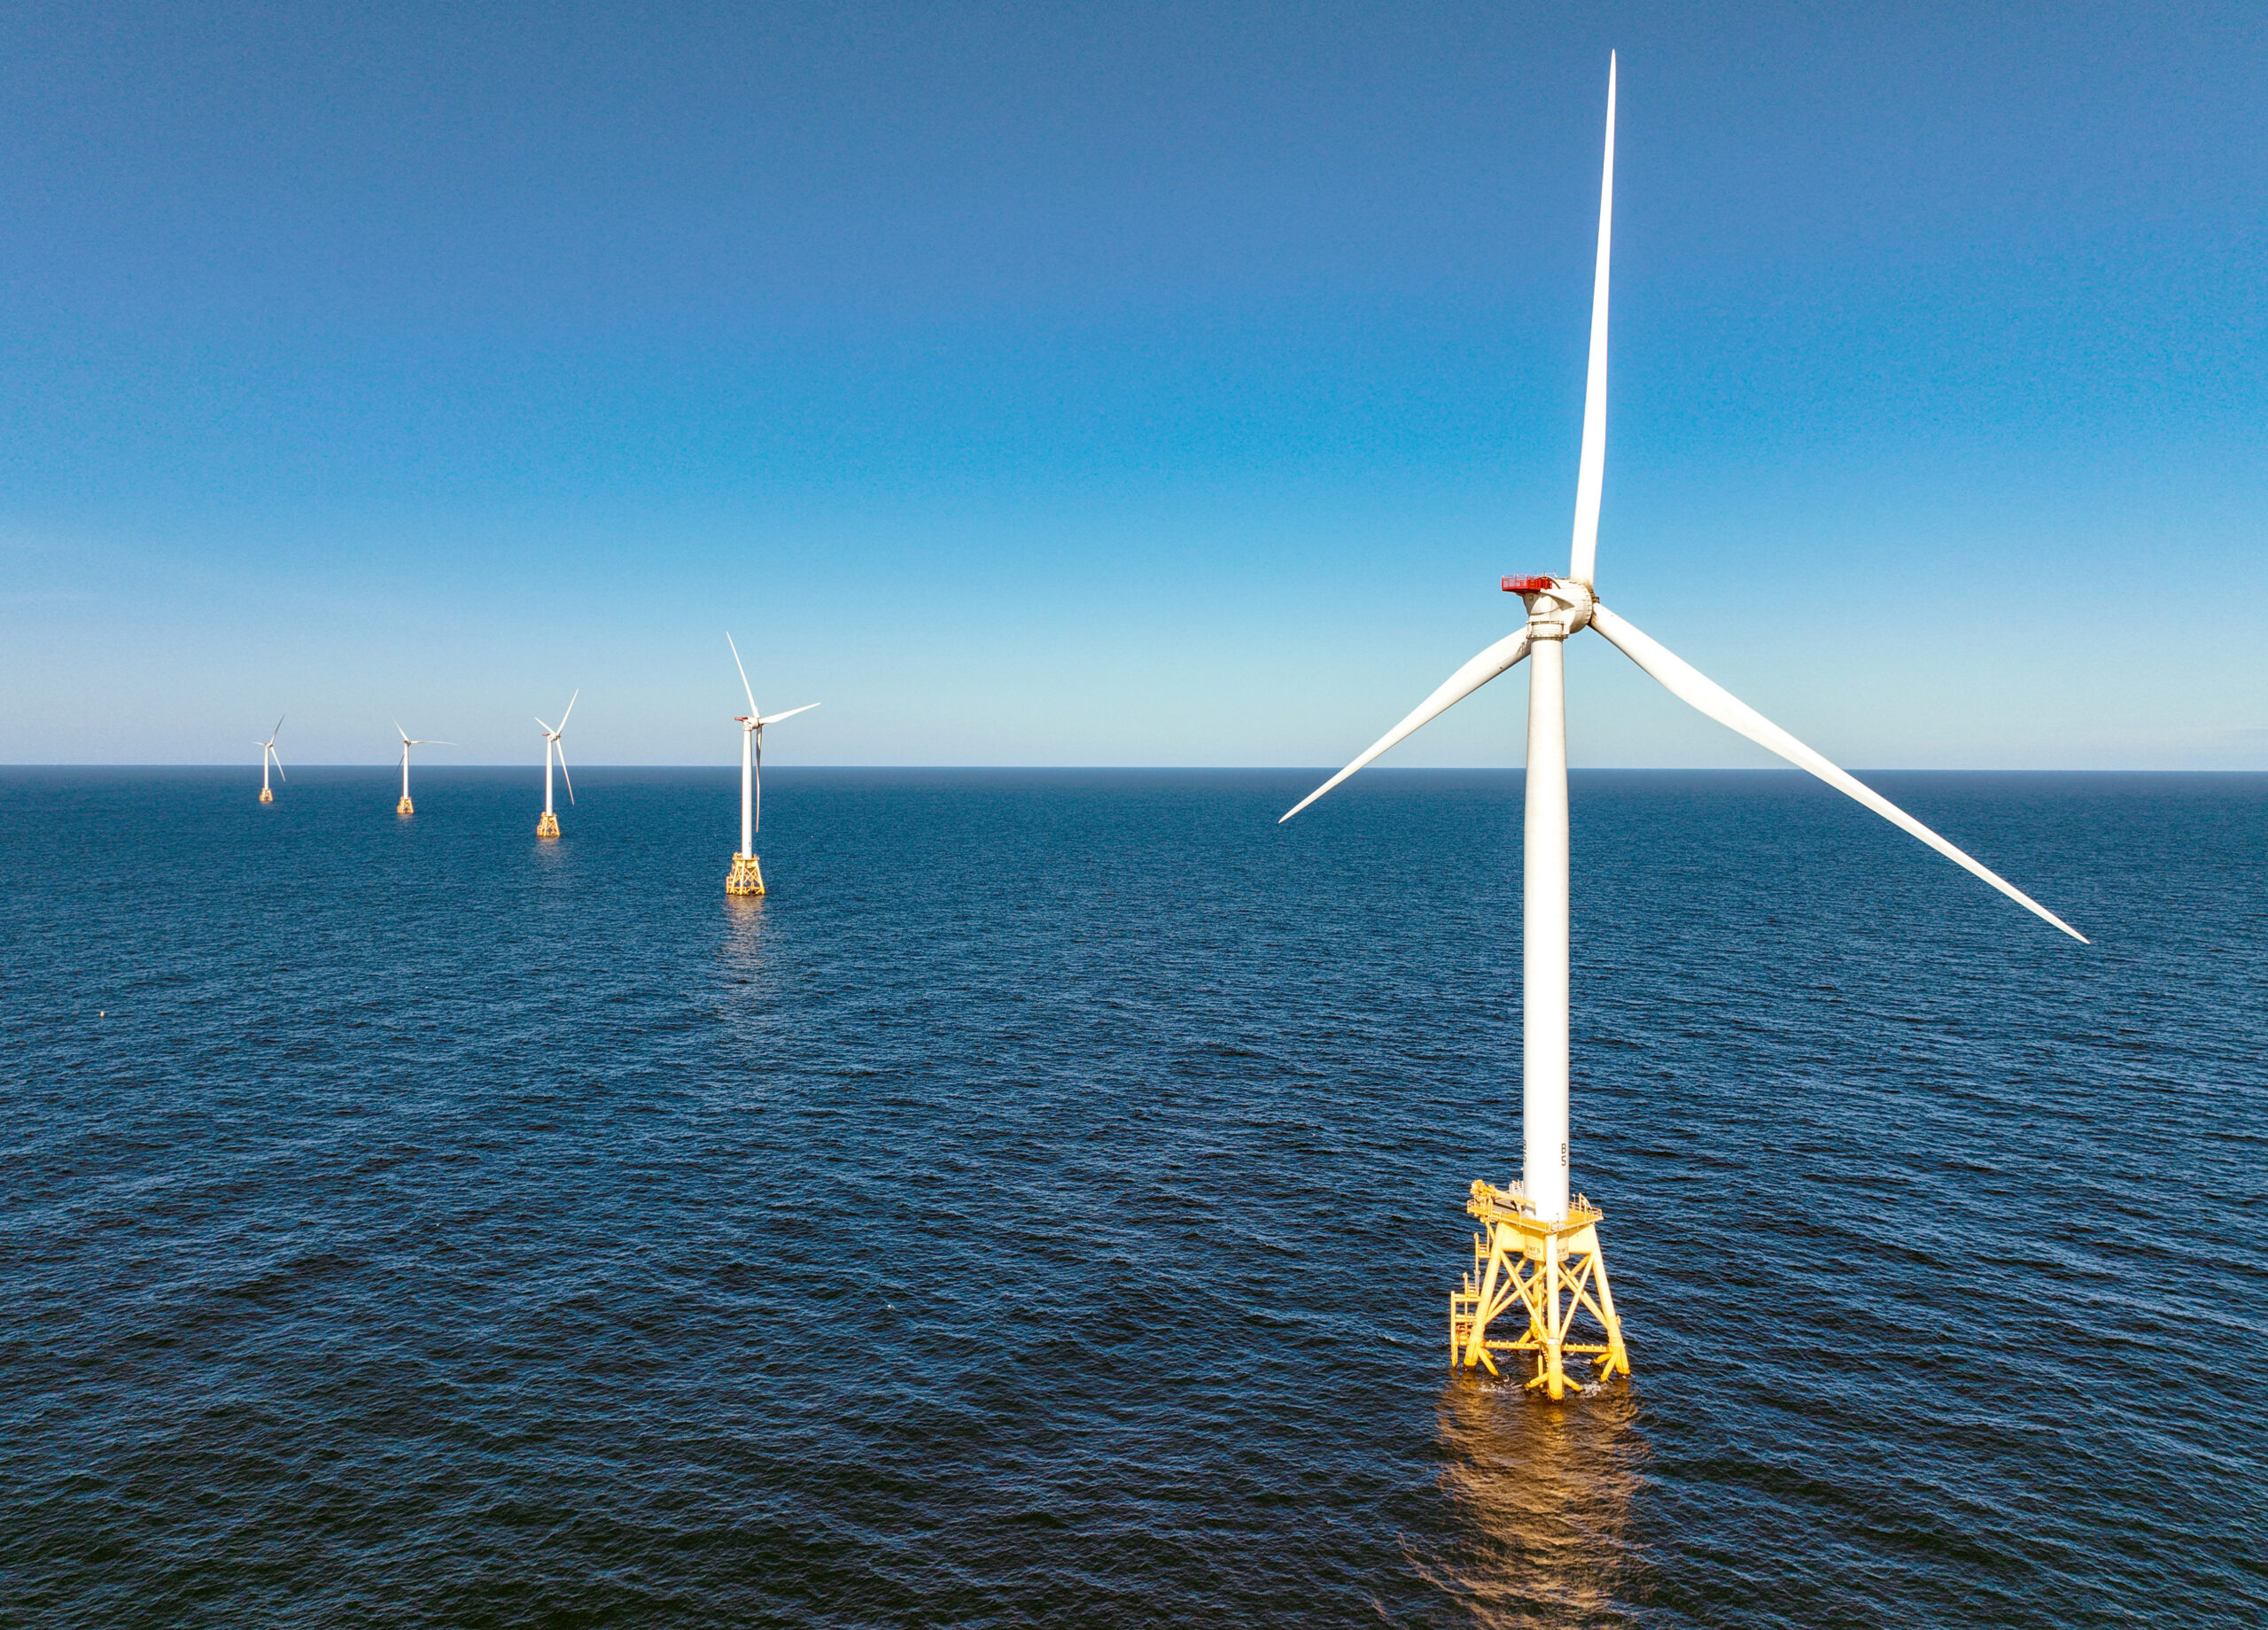 Offshore wind turbines stand in a calm blue sea under a clear sky.